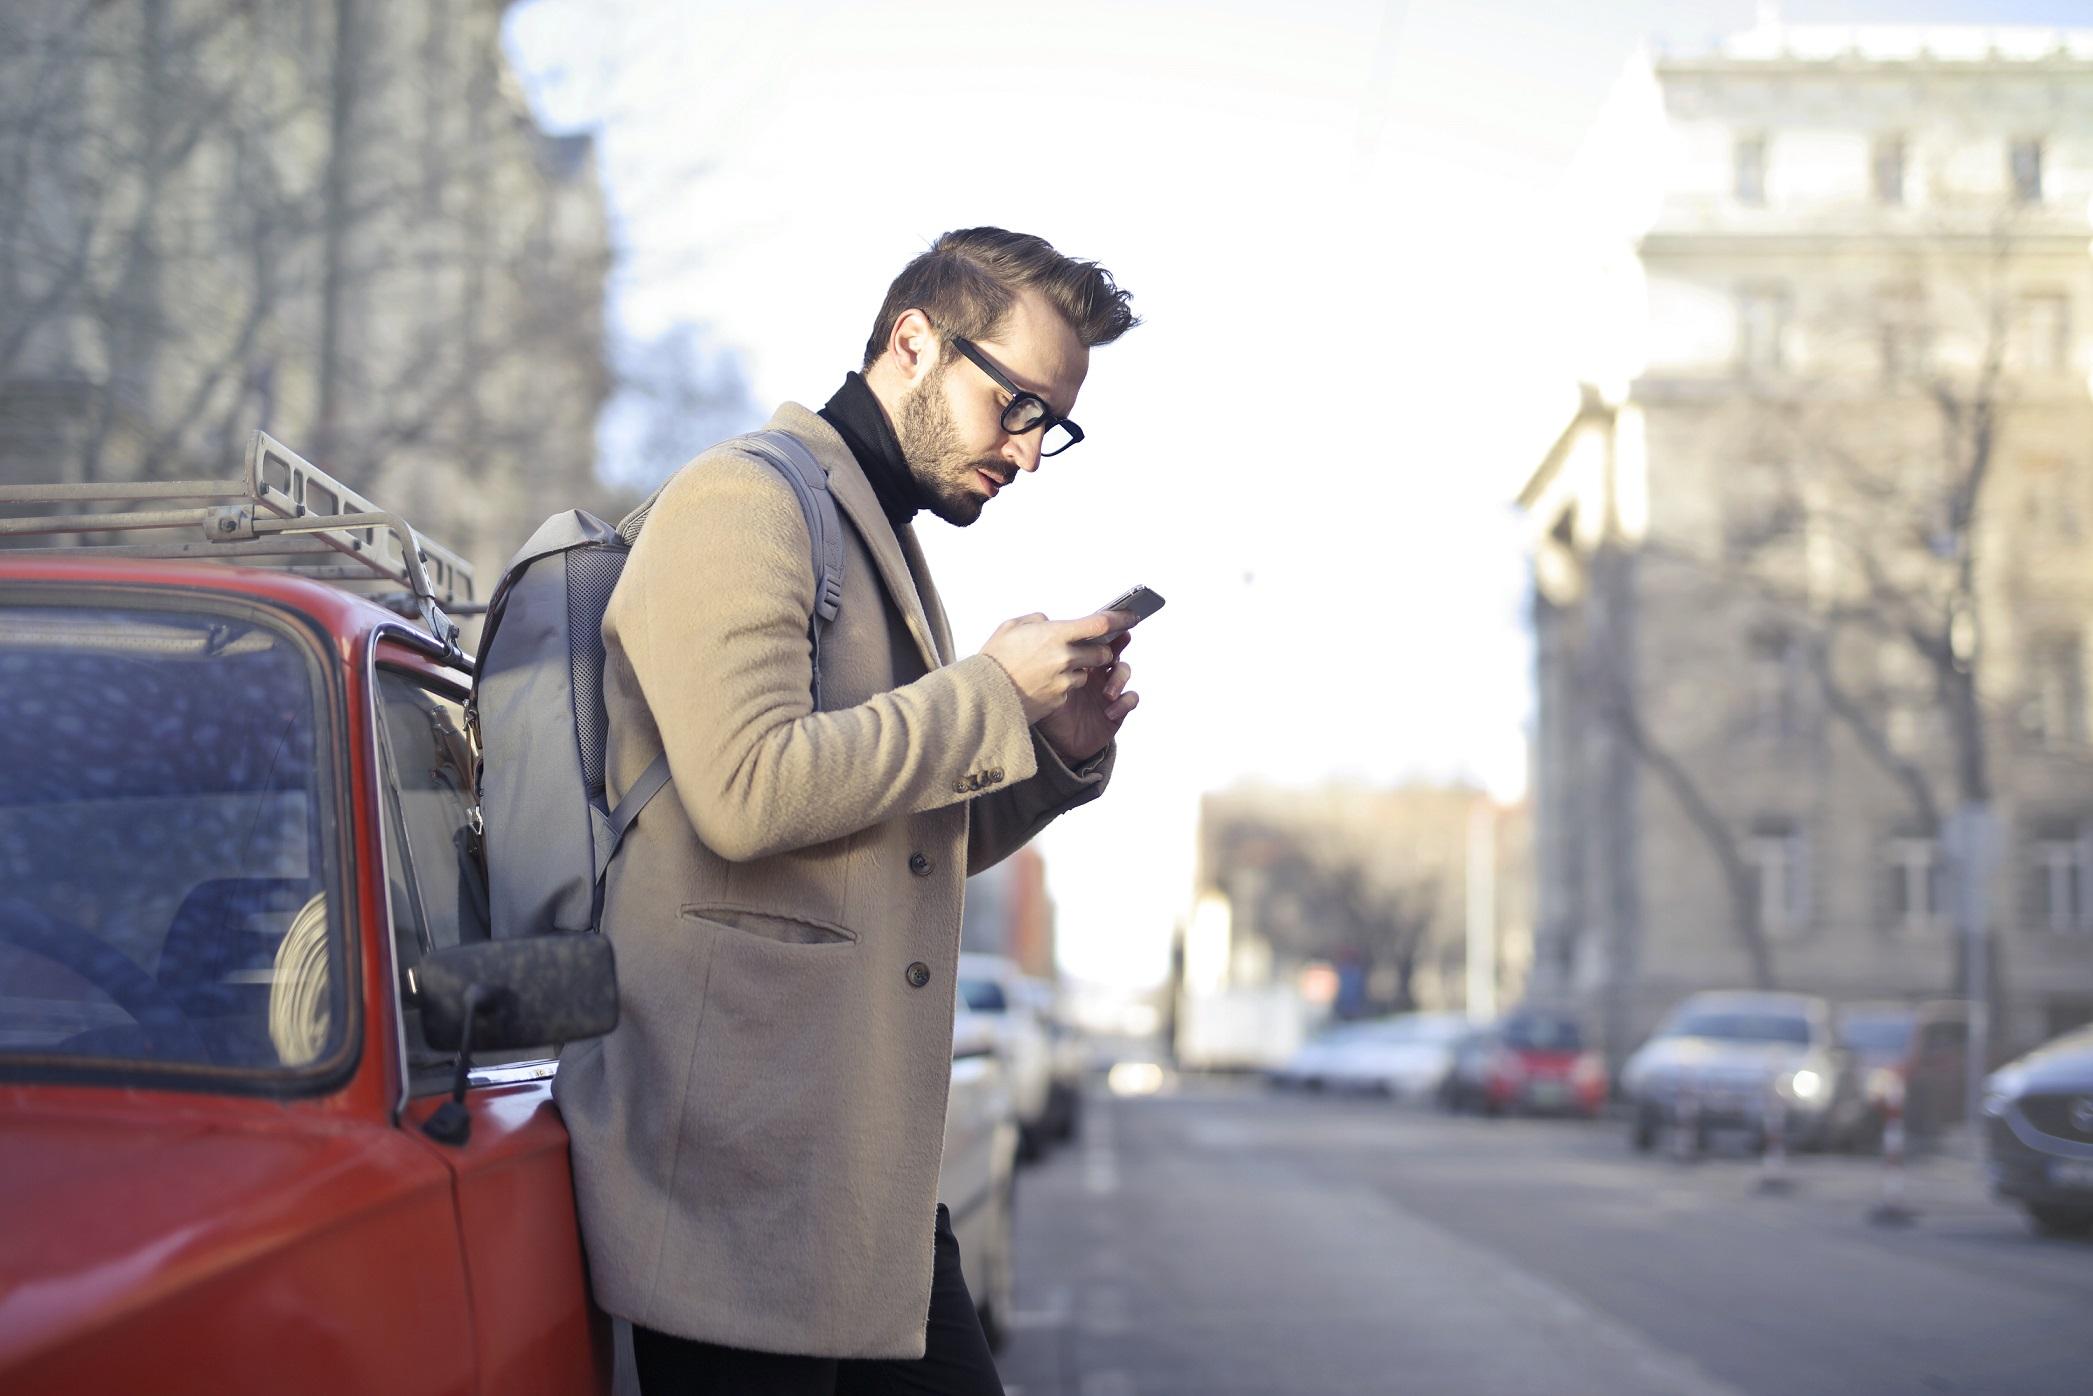 man_outside_looking_at_his_phone_while_leaning_on_car